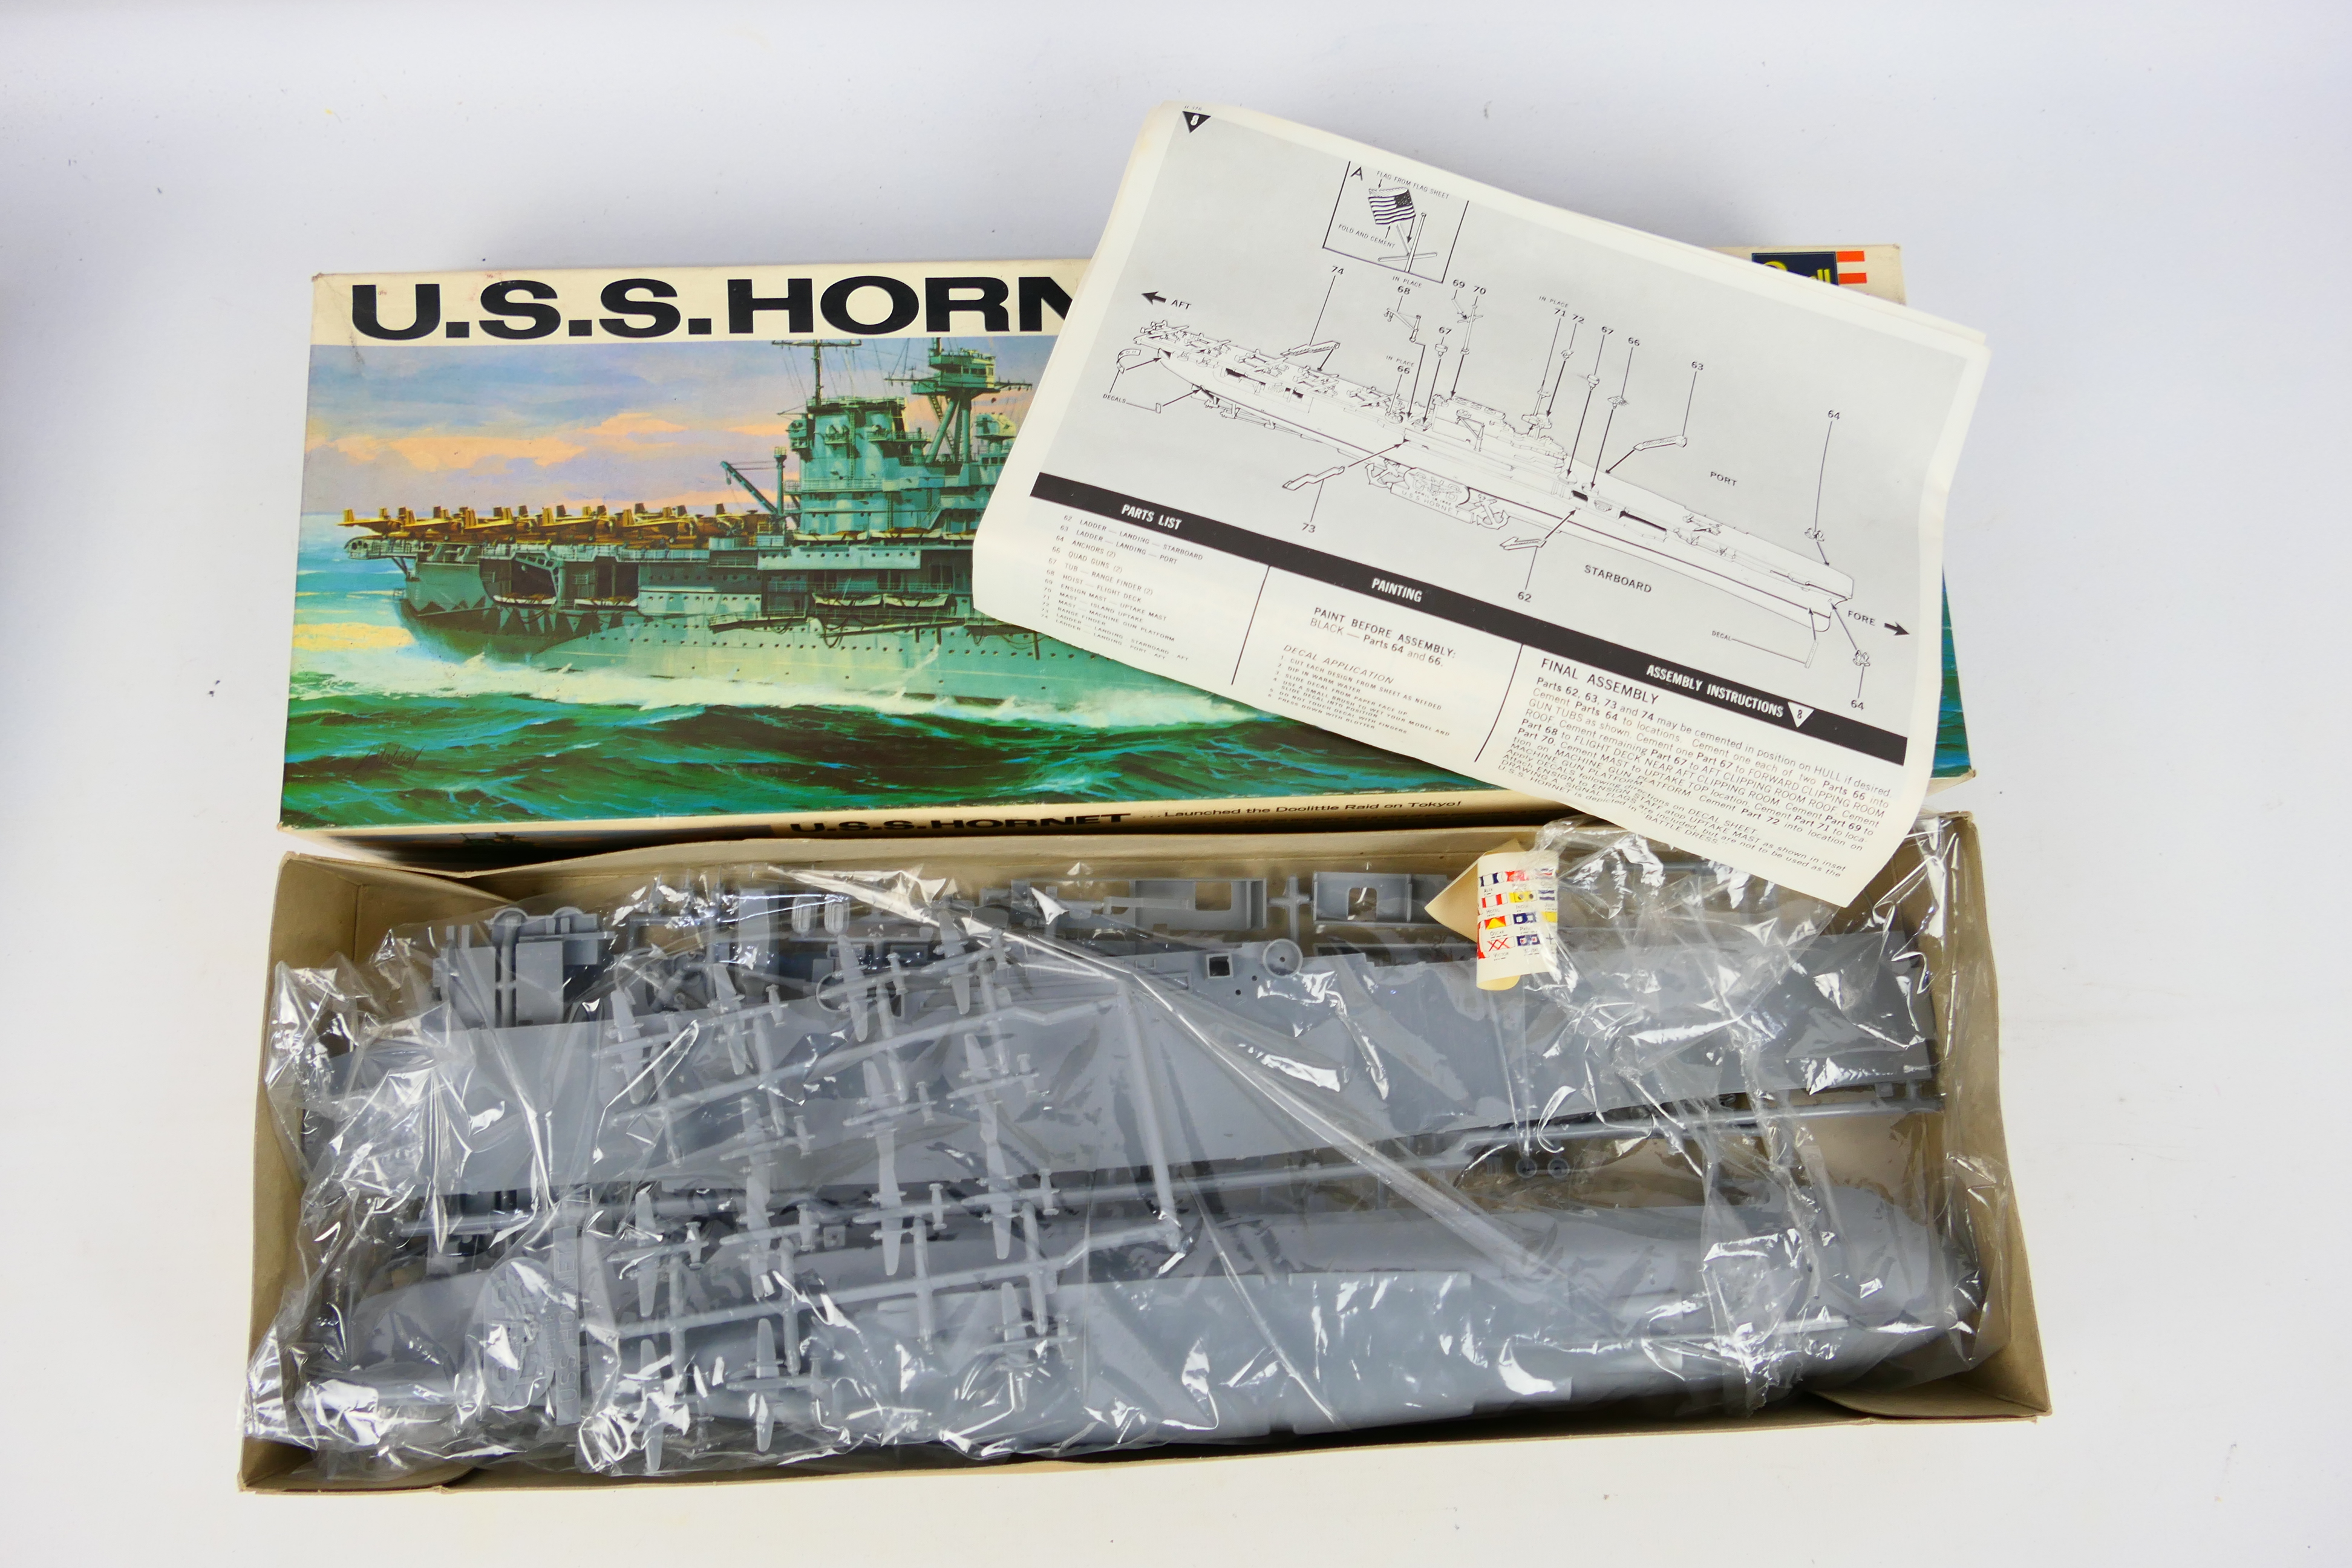 Airfix - Revell - A group of vintage model kits, HMS Tiger in 1:600 scale # 03201-0, - Image 8 of 14